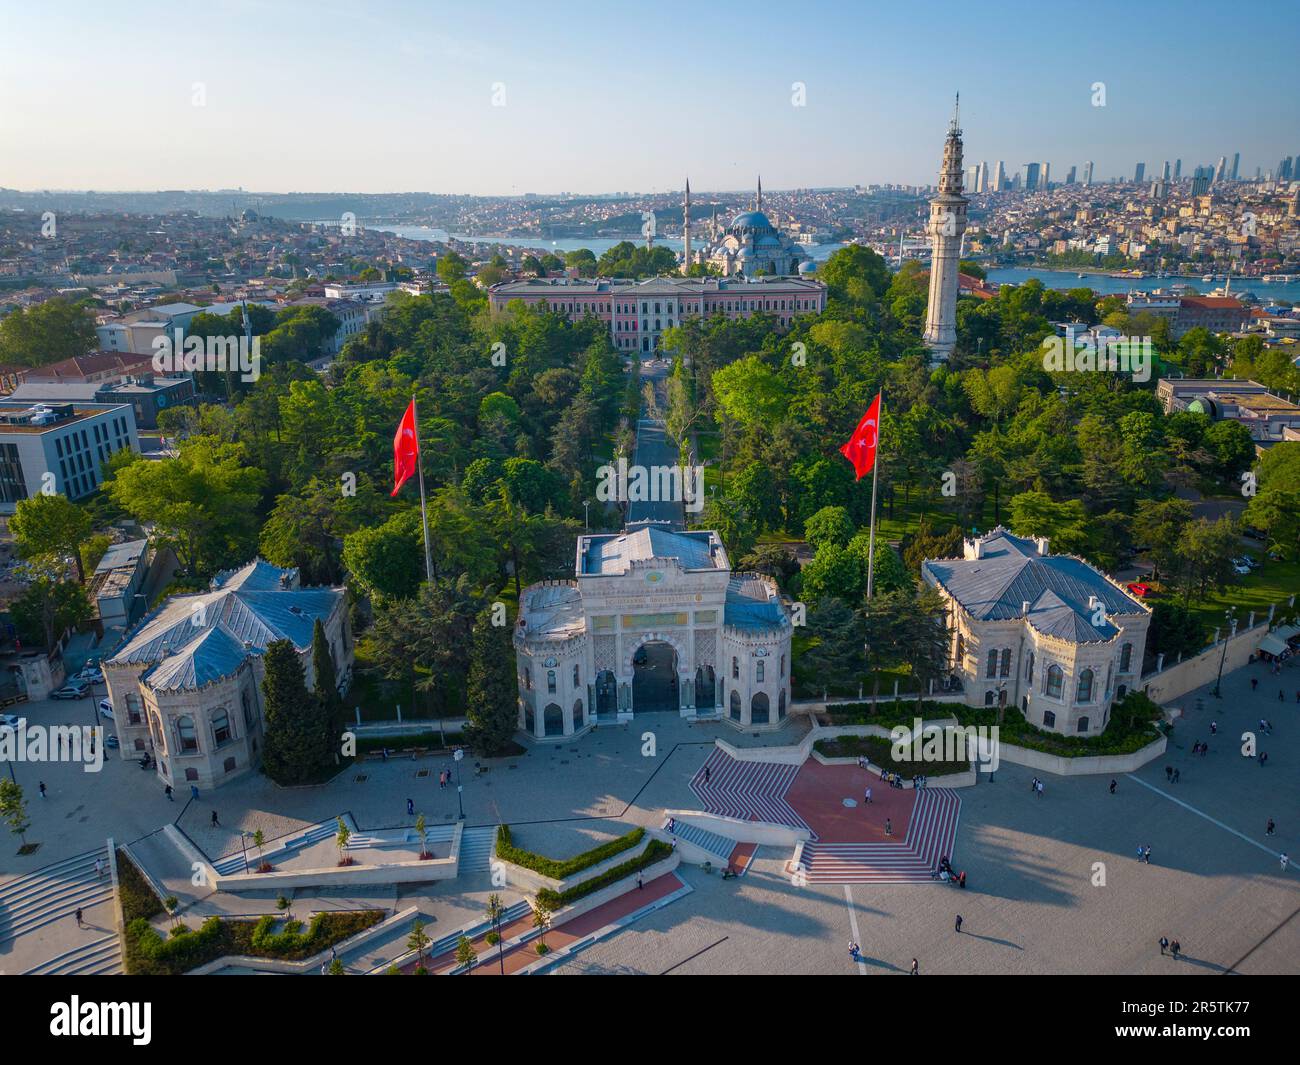 Istanbul University aerial view including Main Gate and Beyazit Tower on Beyazit Square in historic city of Istanbul, Turkey. Historic Areas of Istanb Stock Photo